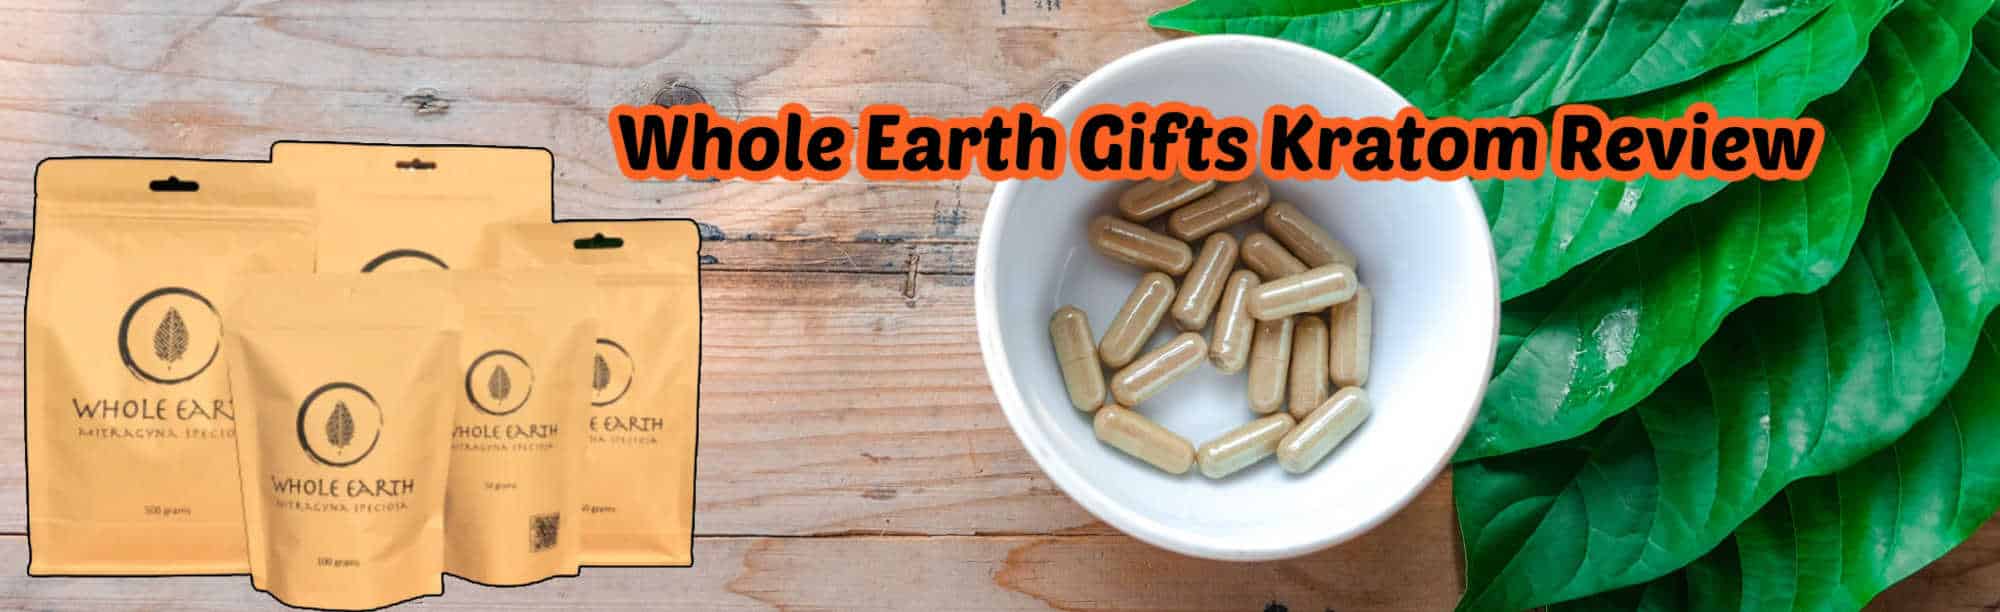 image of whole earth gifts kratom review